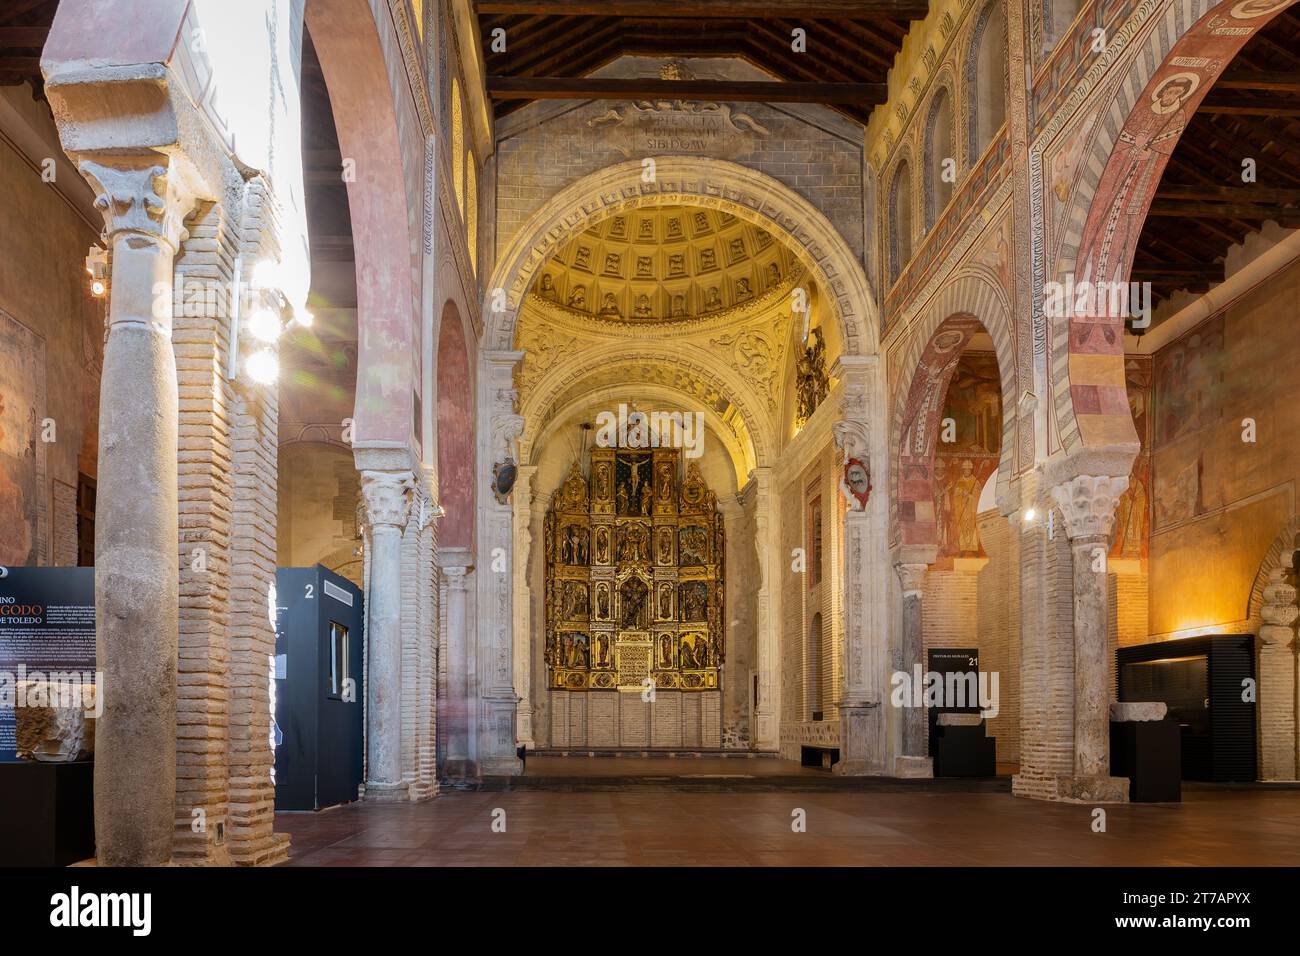 Toledo, Spain, 08.10.21. Museum of the Councils and Visigoth Culture inside the Church of San Roman with golden altarpiece and Romanesque frescos. Stock Photo